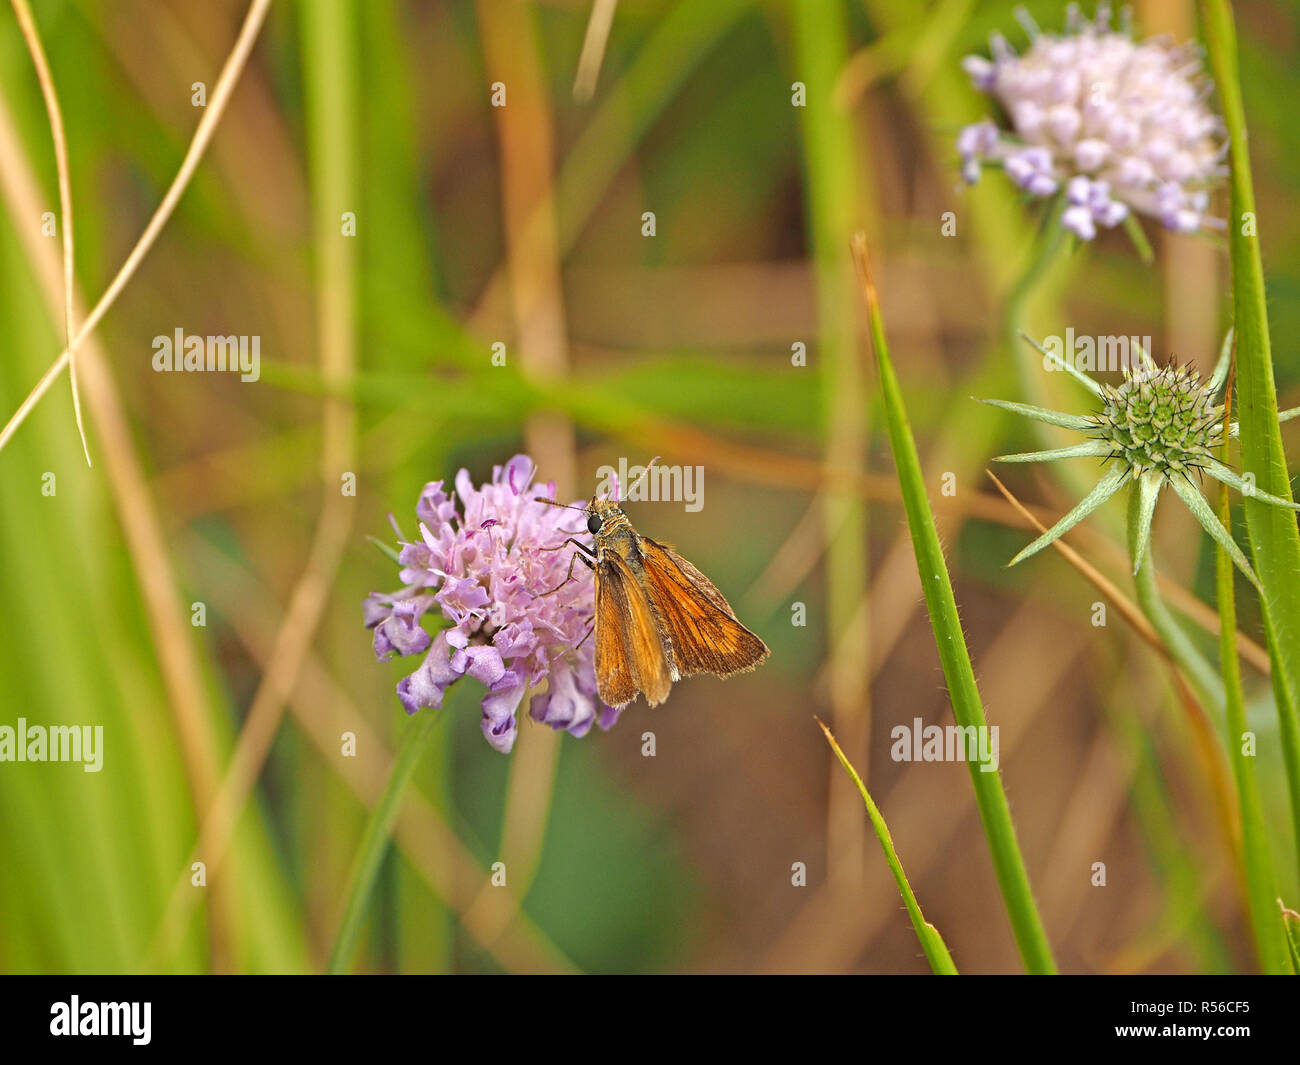 large skipper butterfly (Ochlodes sylvanus) feeding on nectar of flowers of Field scabious (Knautia arvensis) in meadow in Tuscany, Italy Stock Photo